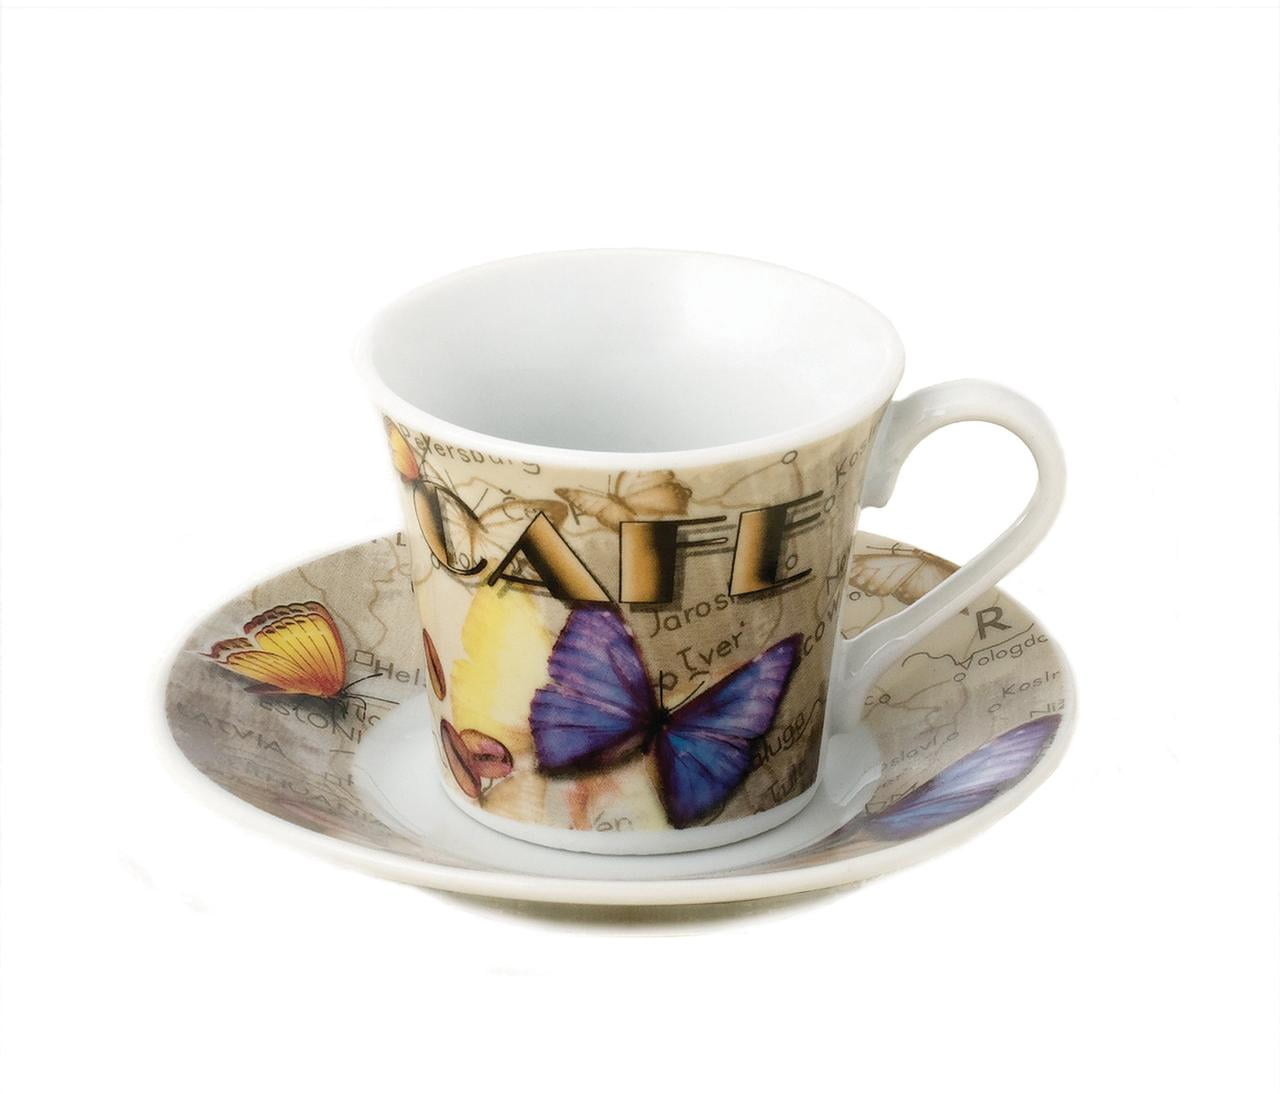 with 6 Stand - of Cups Metal Set 2oz, Saucers White and Set Espresso Porcelain